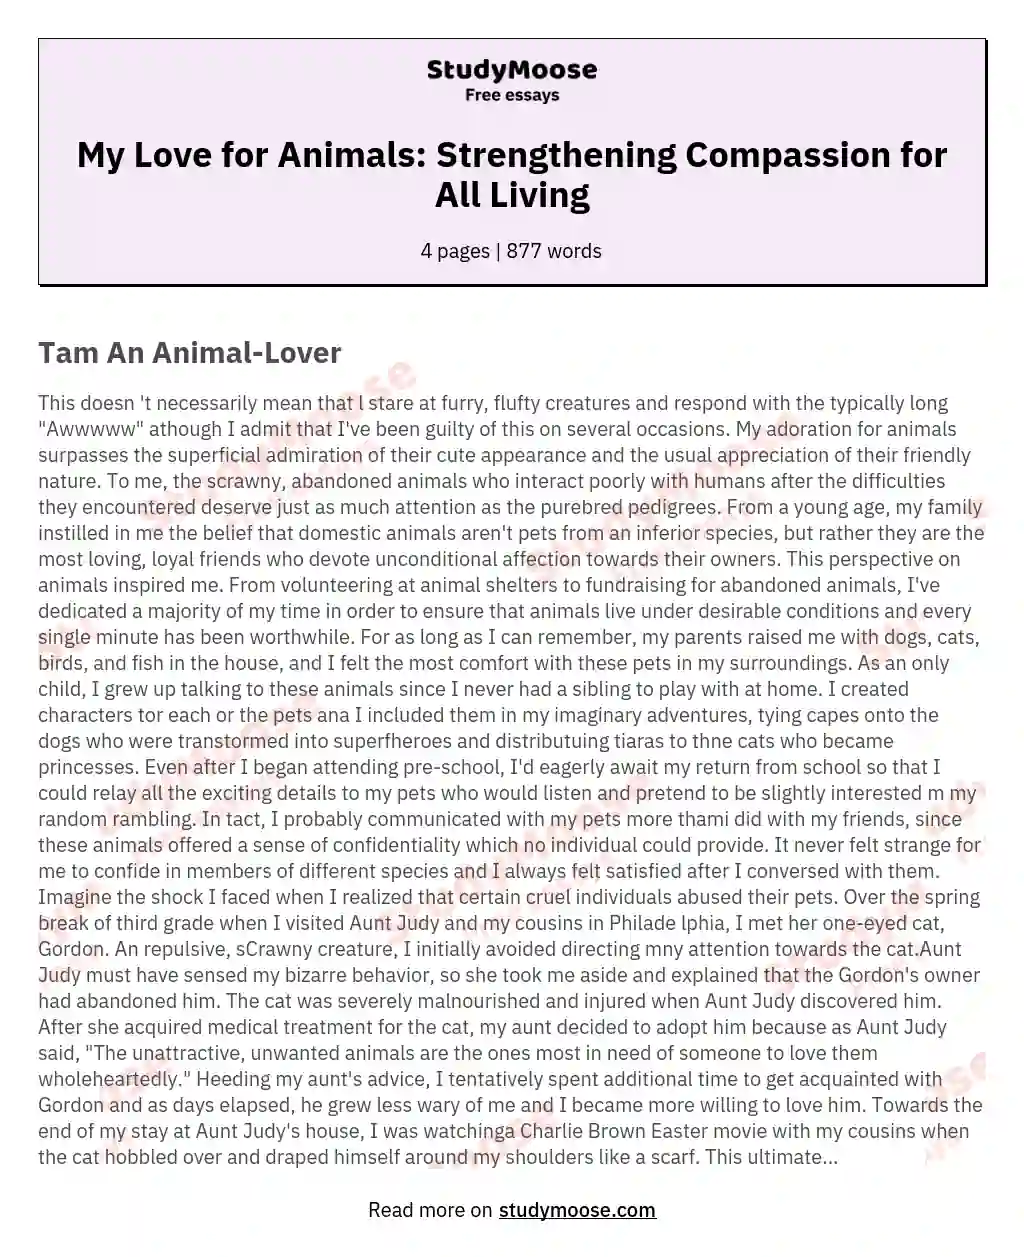 My Love for Animals: Strengthening Compassion for All Living essay